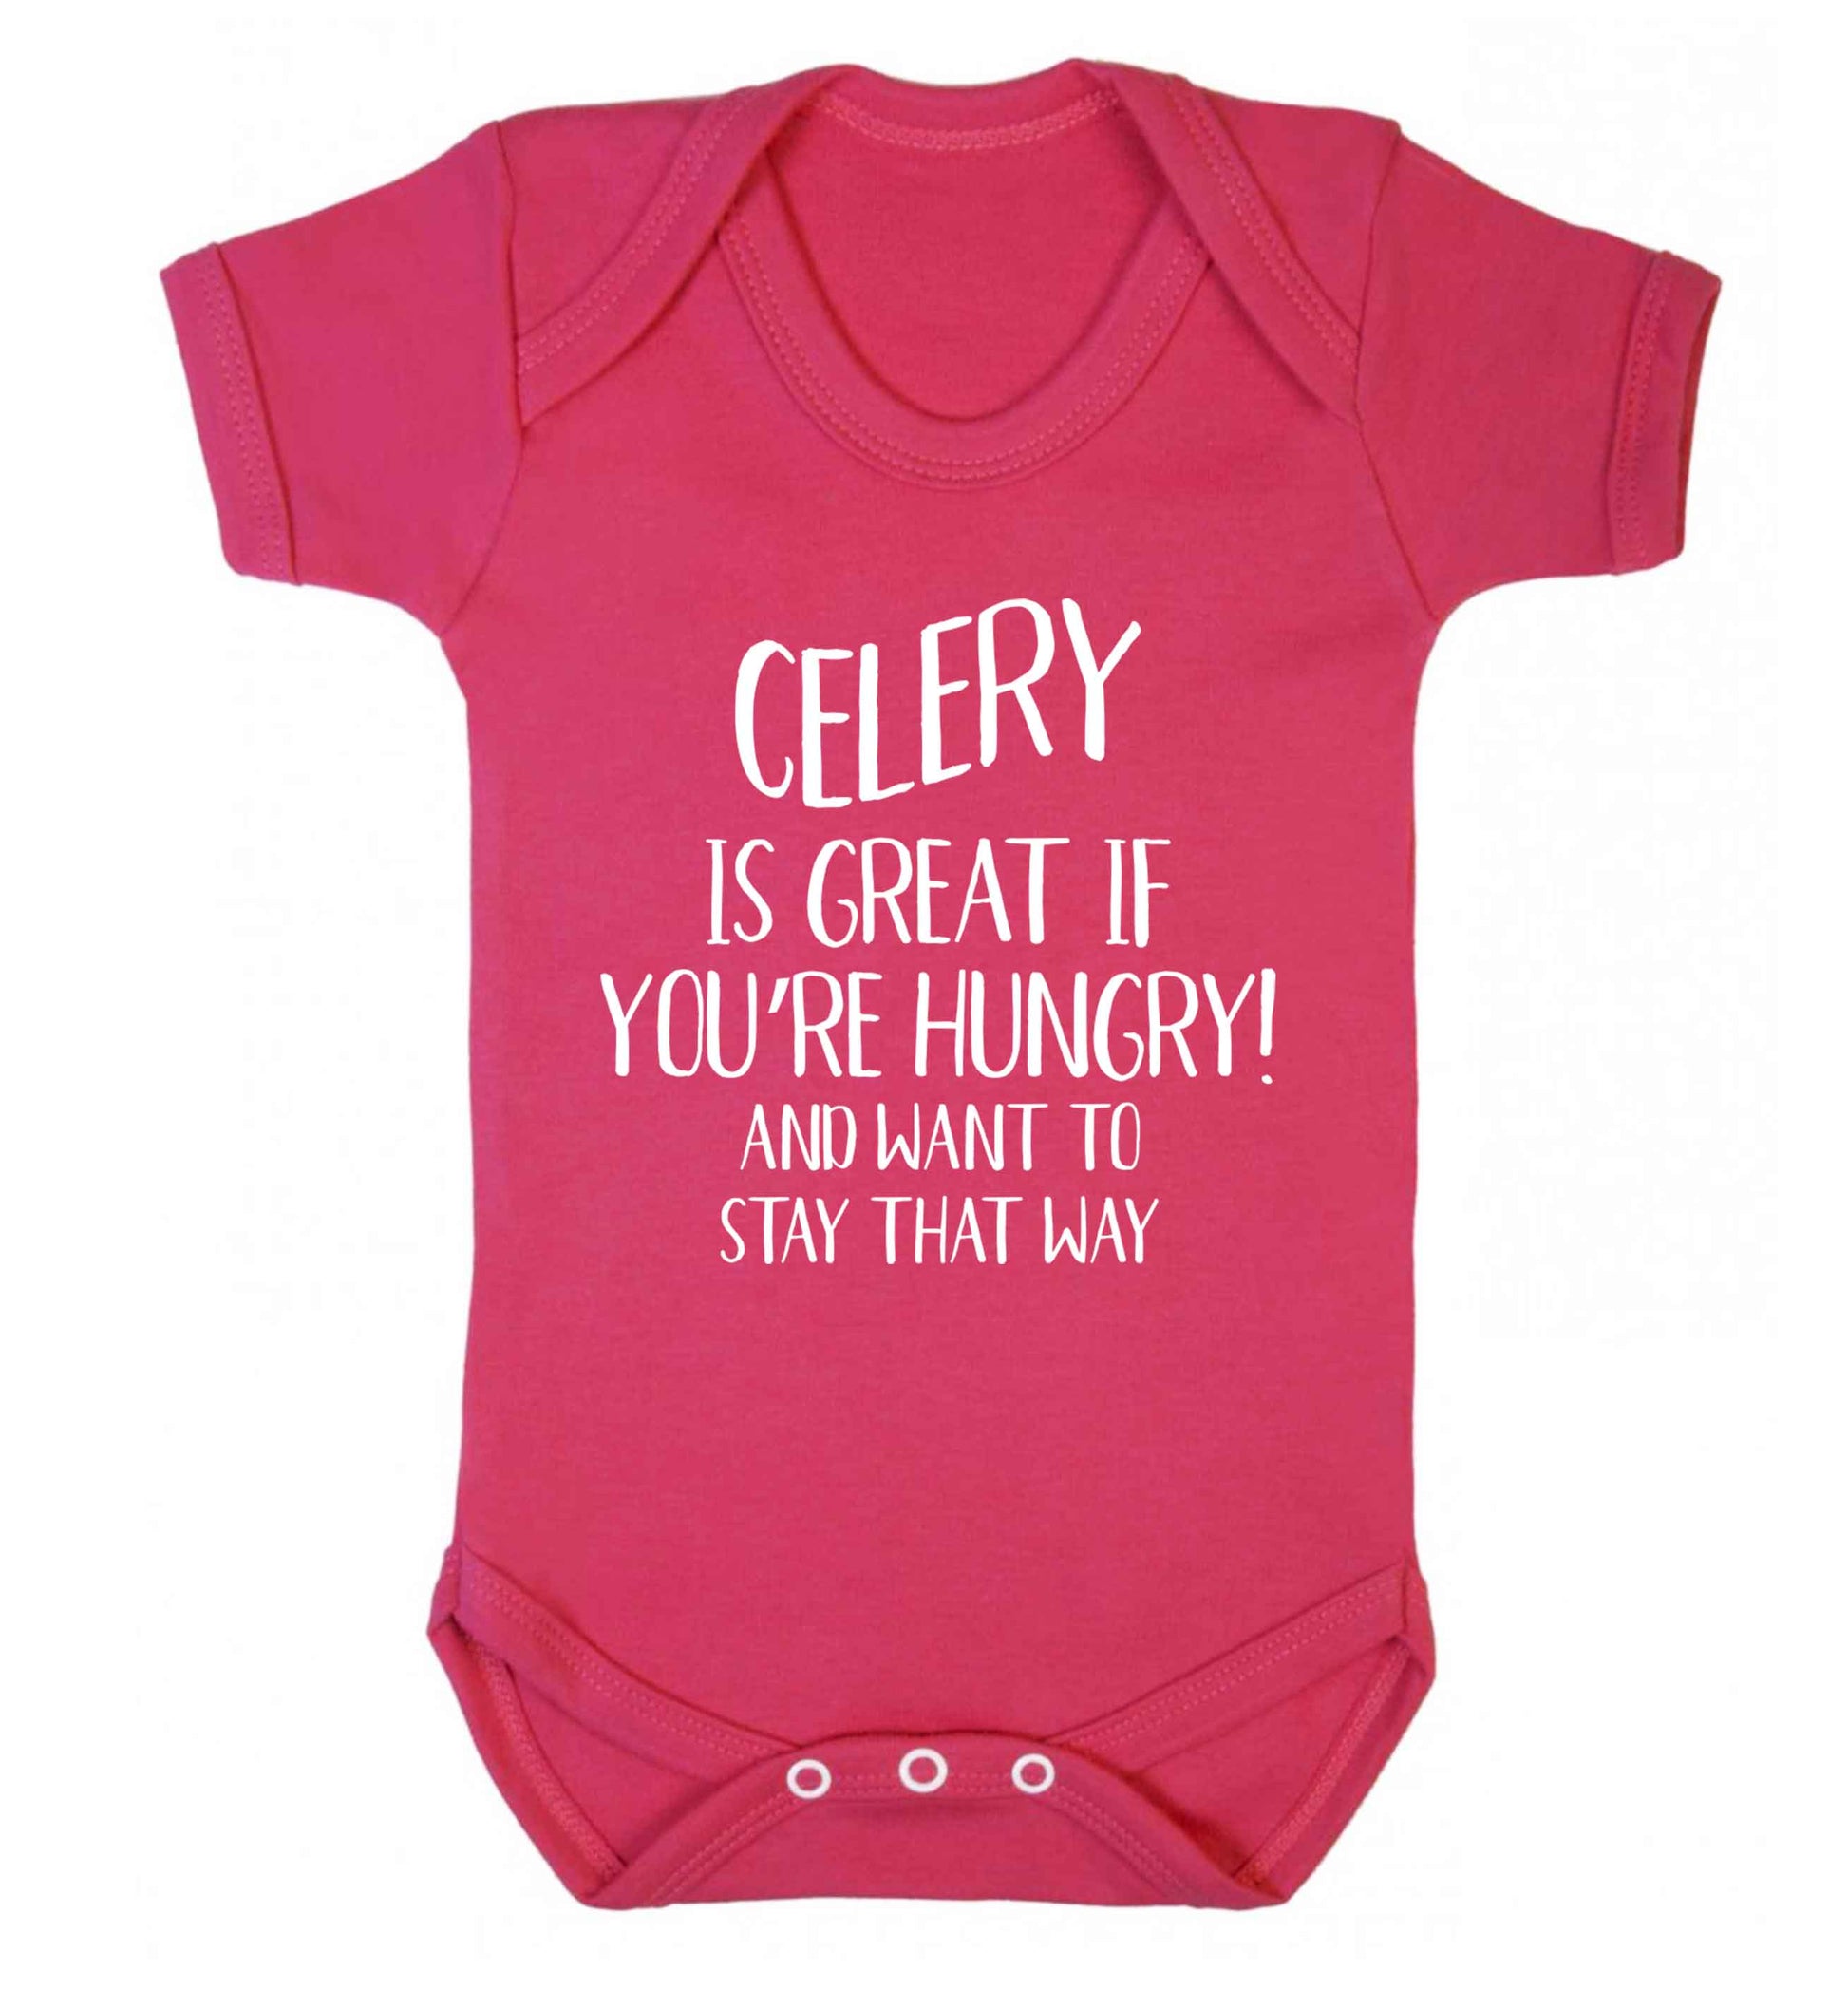 Cellery is great when you're hungry and want to stay that way Baby Vest dark pink 18-24 months